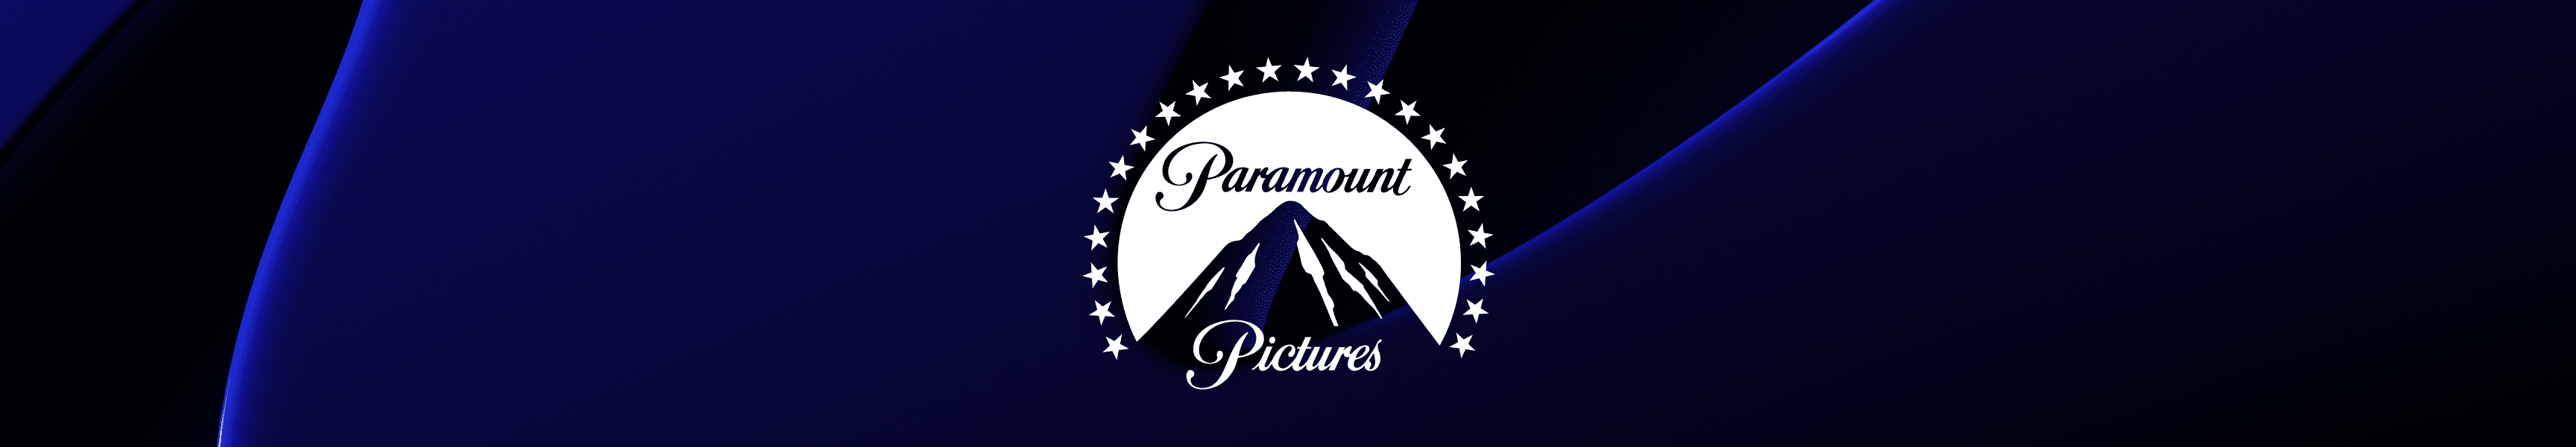 Paramount Pictures Patches